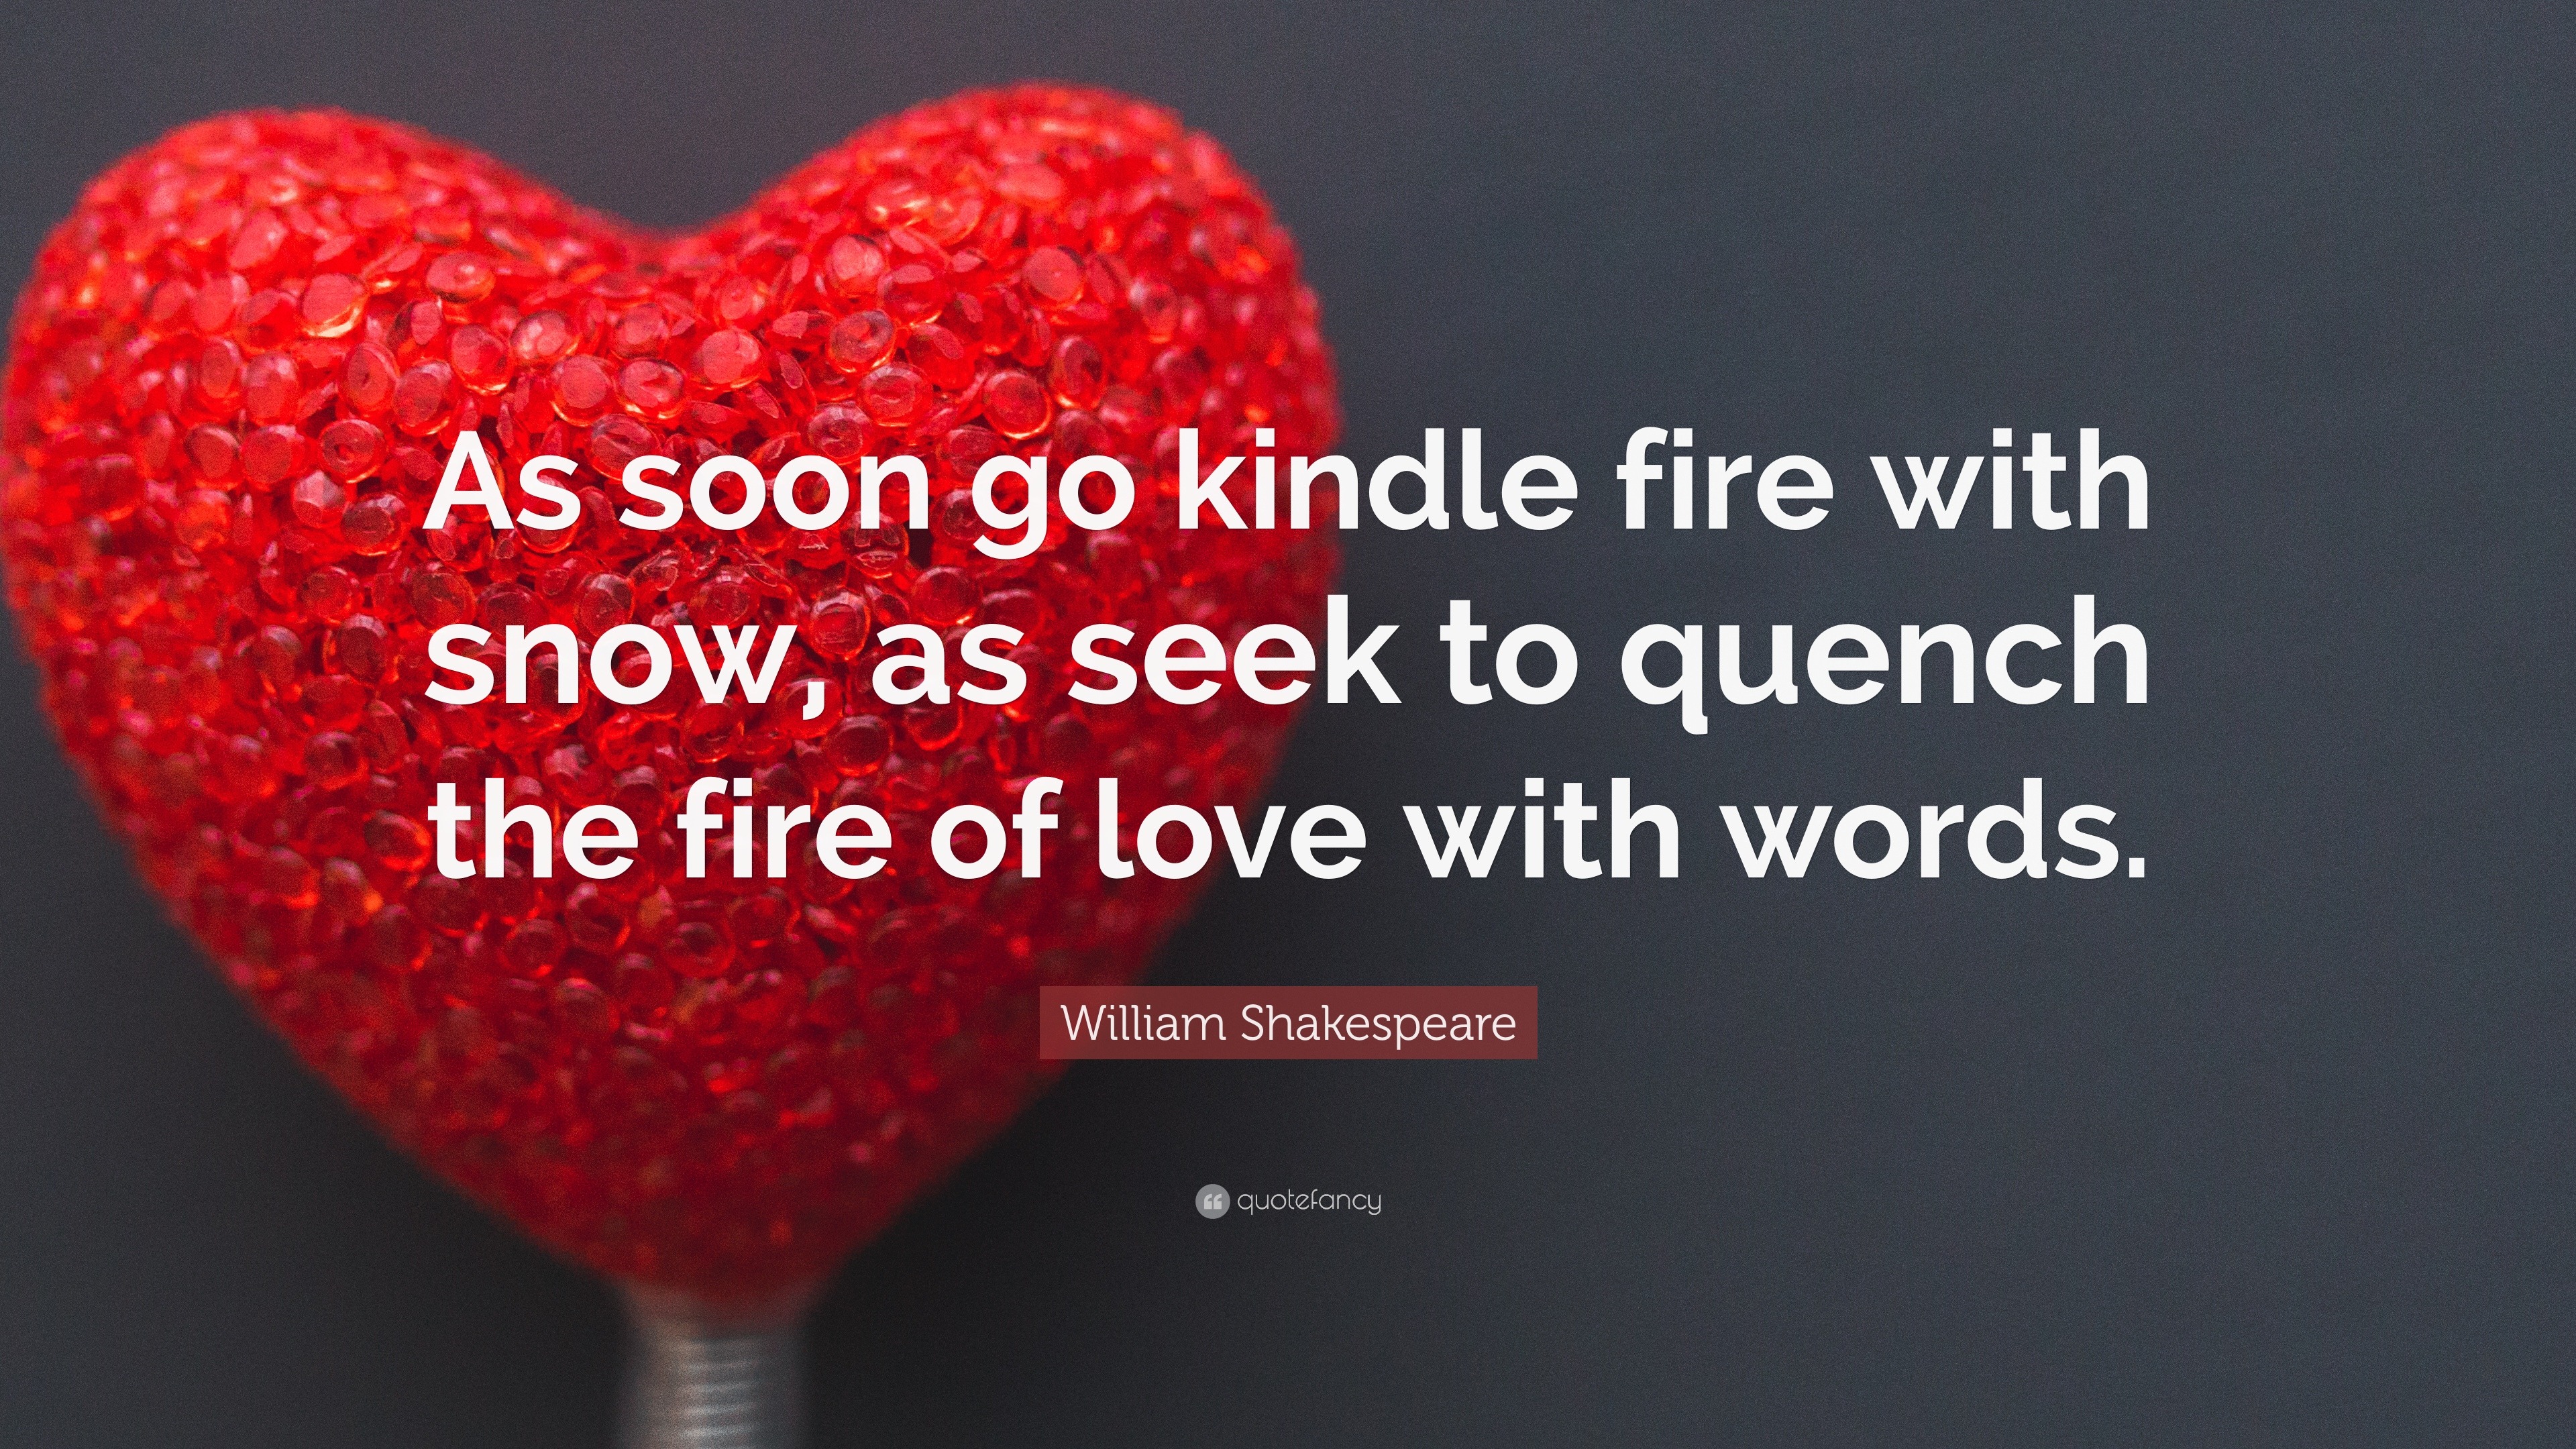 William Shakespeare Quote “As soon go kindle fire with snow as seek to